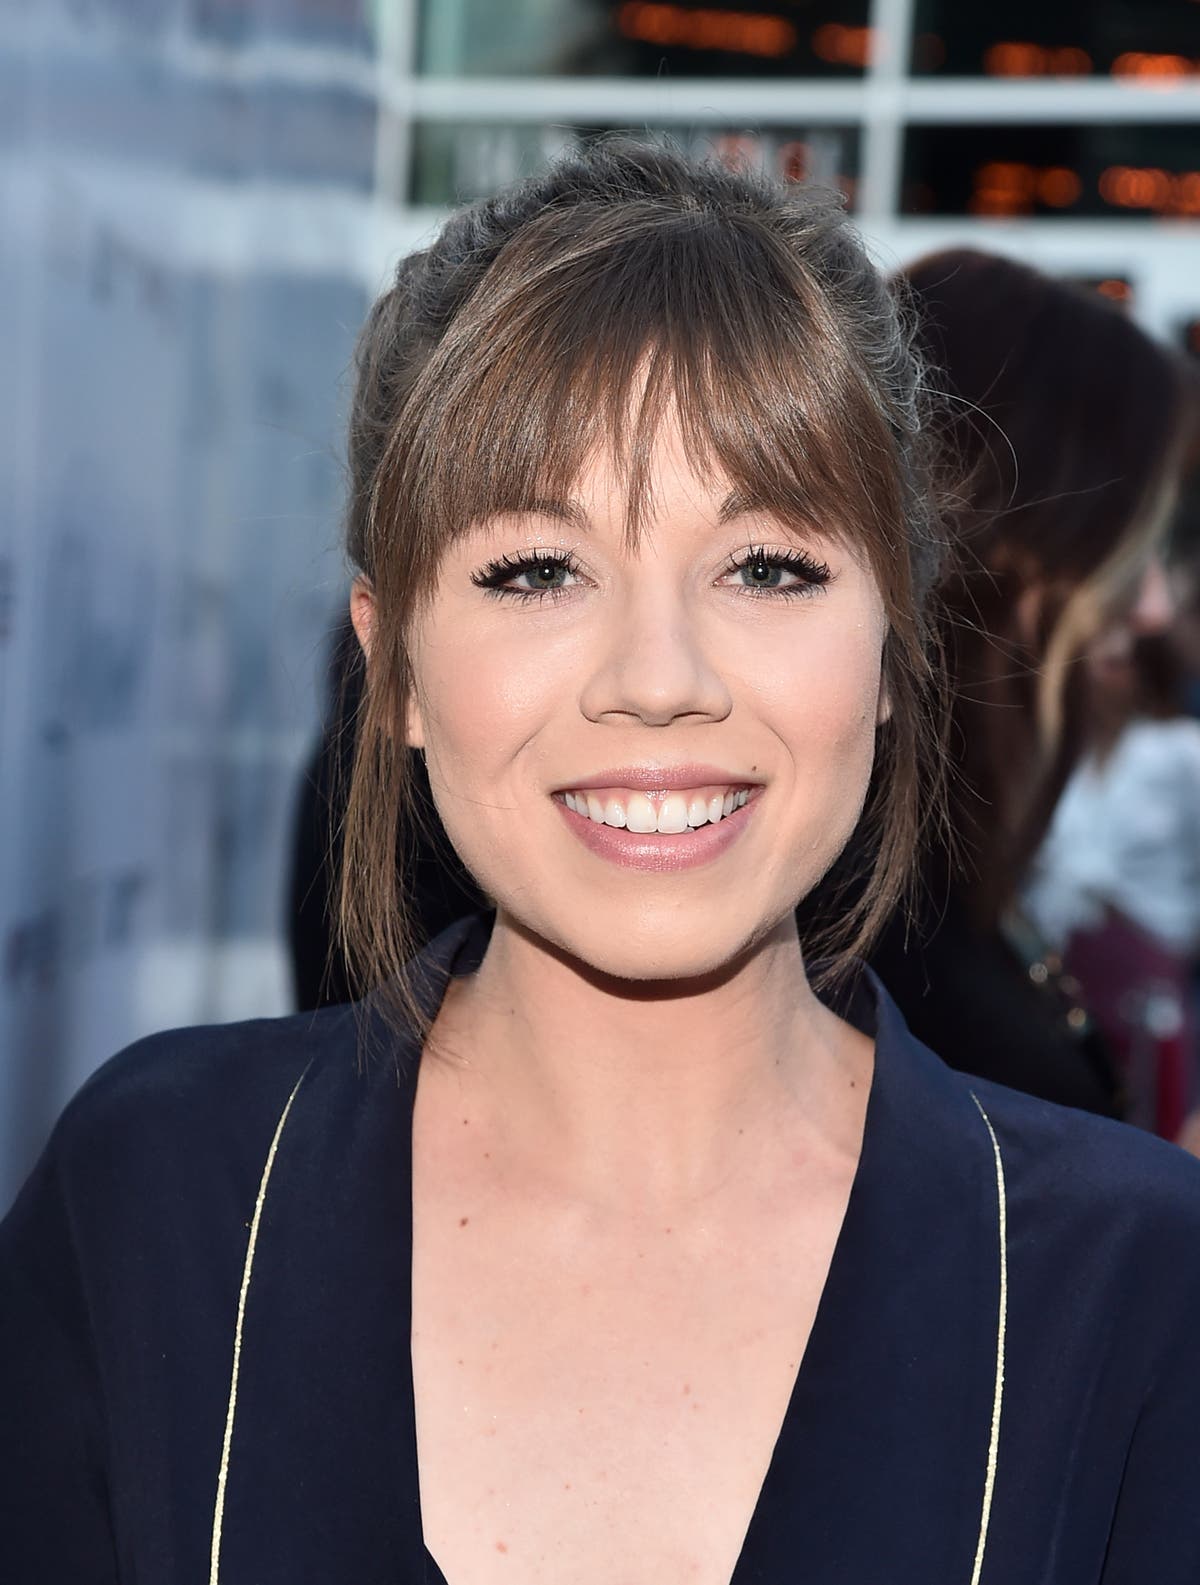 iCarly star announces tell-all memoir detailing abusive relationship with her mother